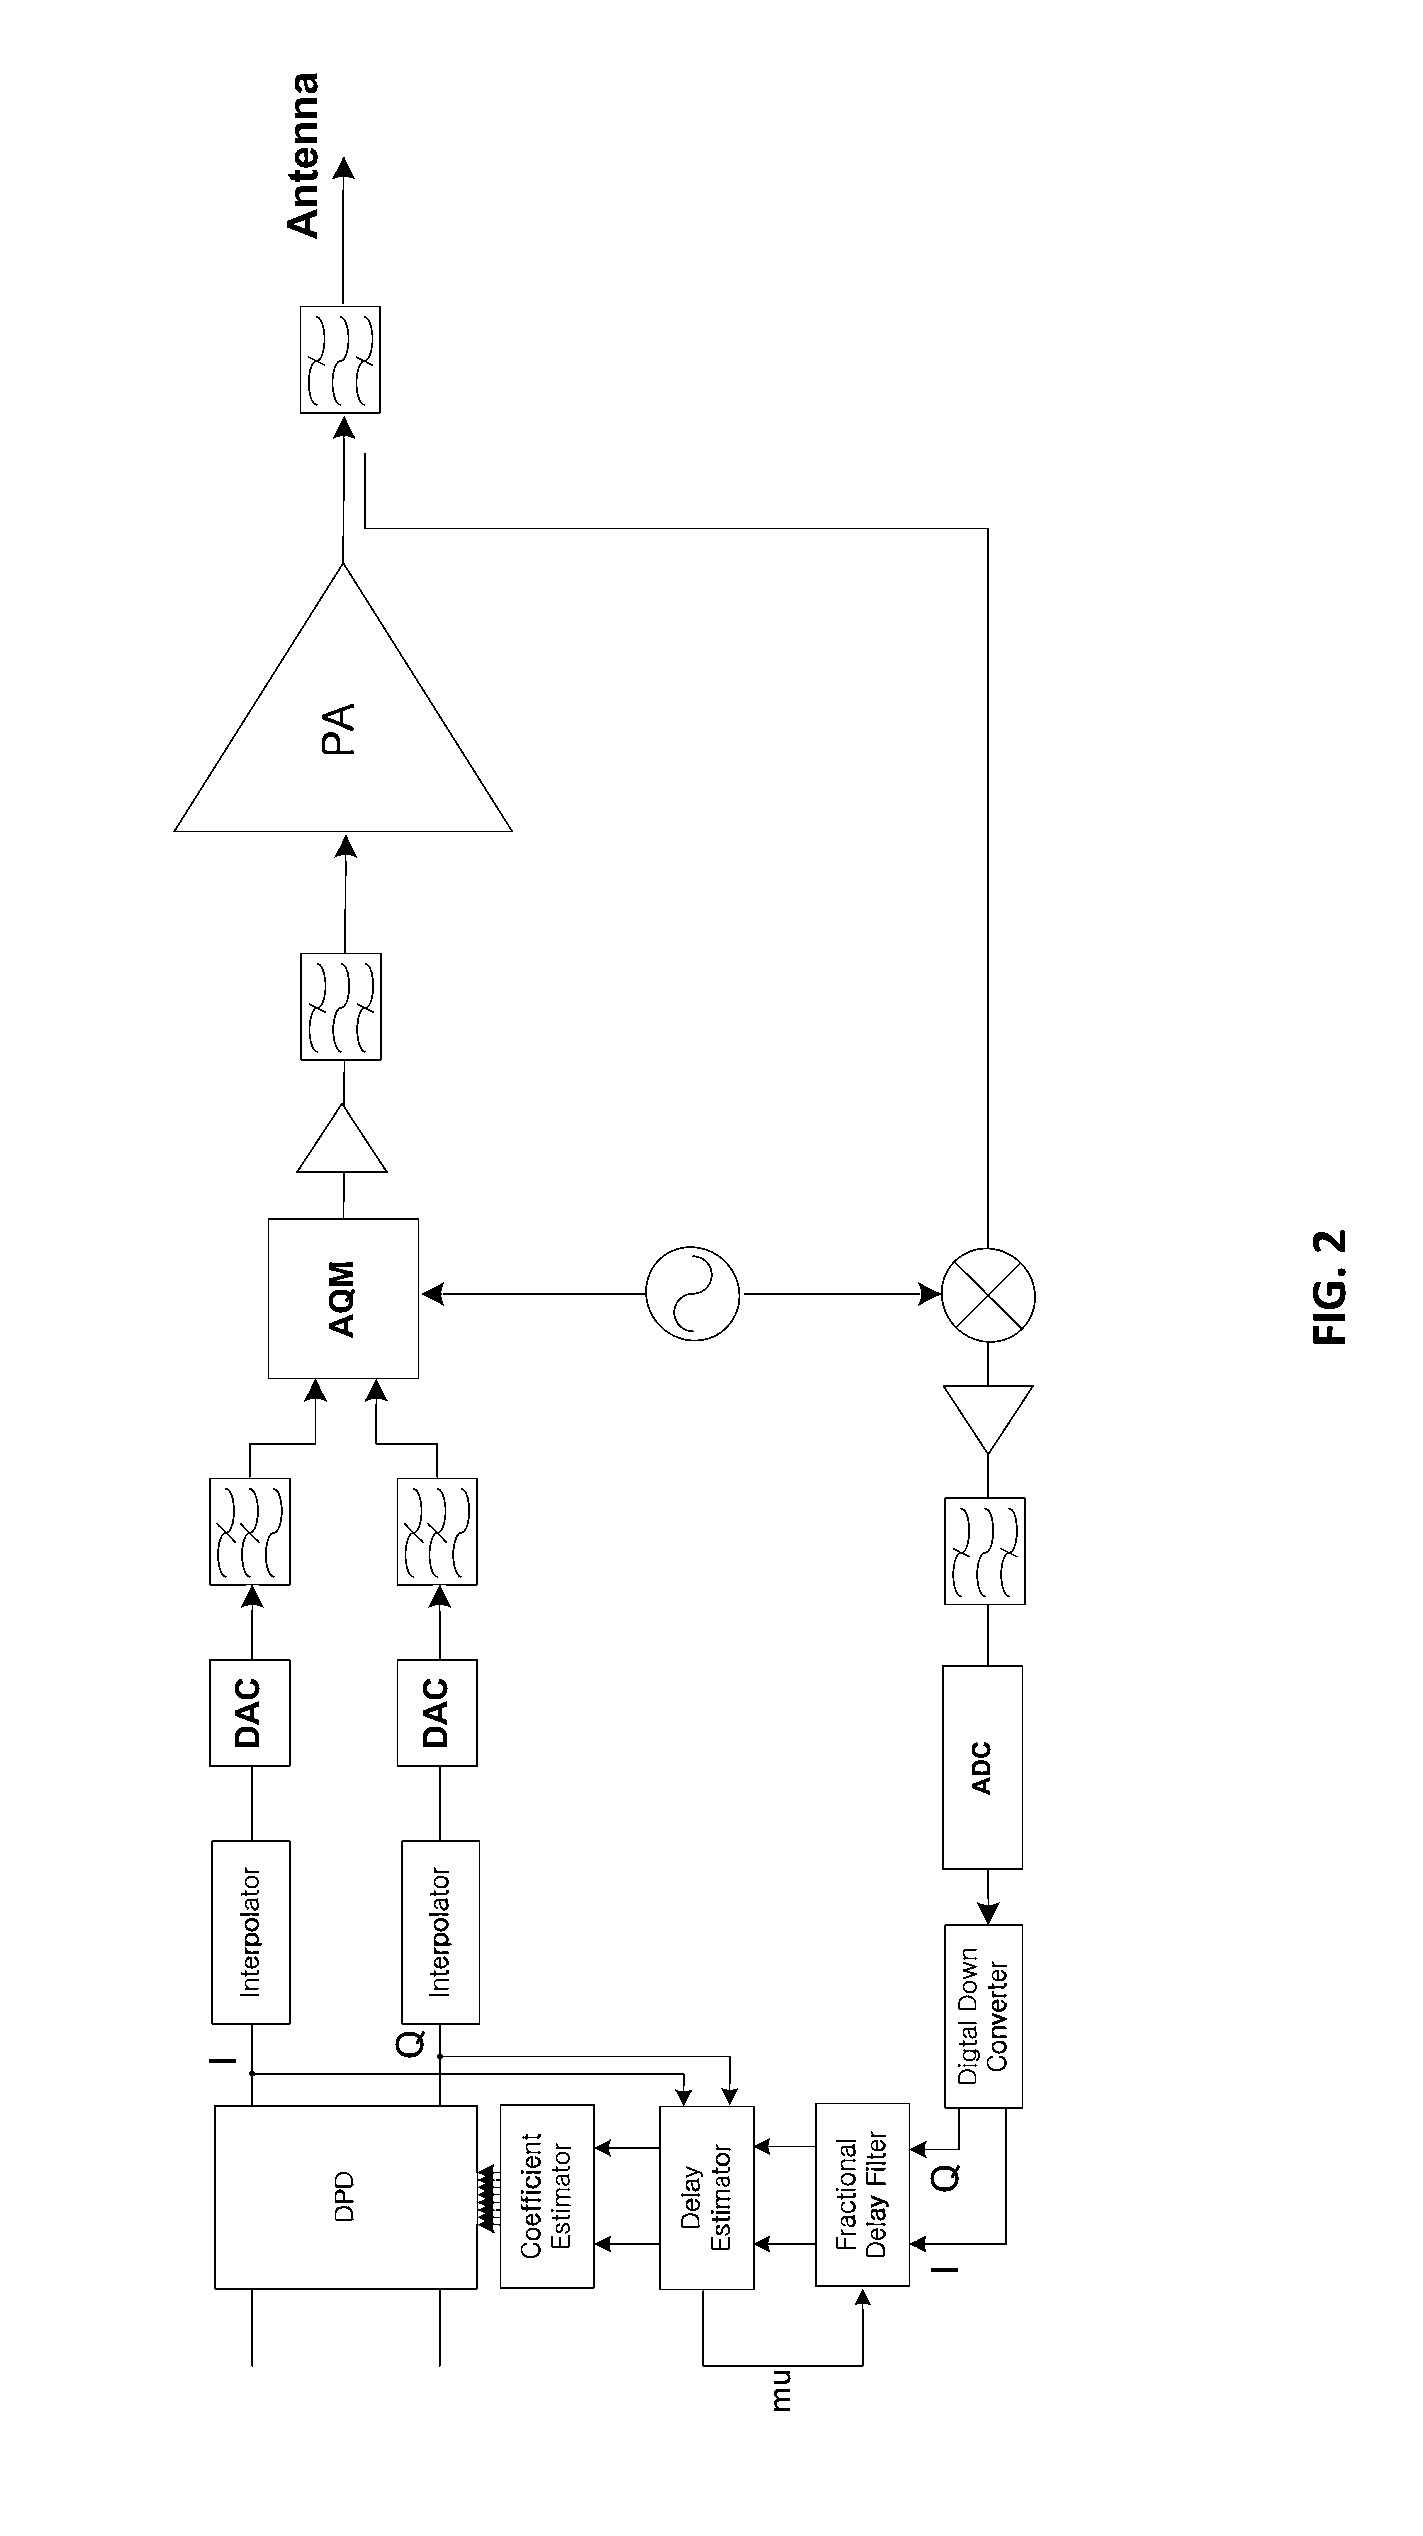 Method and system for aligning signals widely spaced in frequency for wideband digital predistortion in wireless communication systems